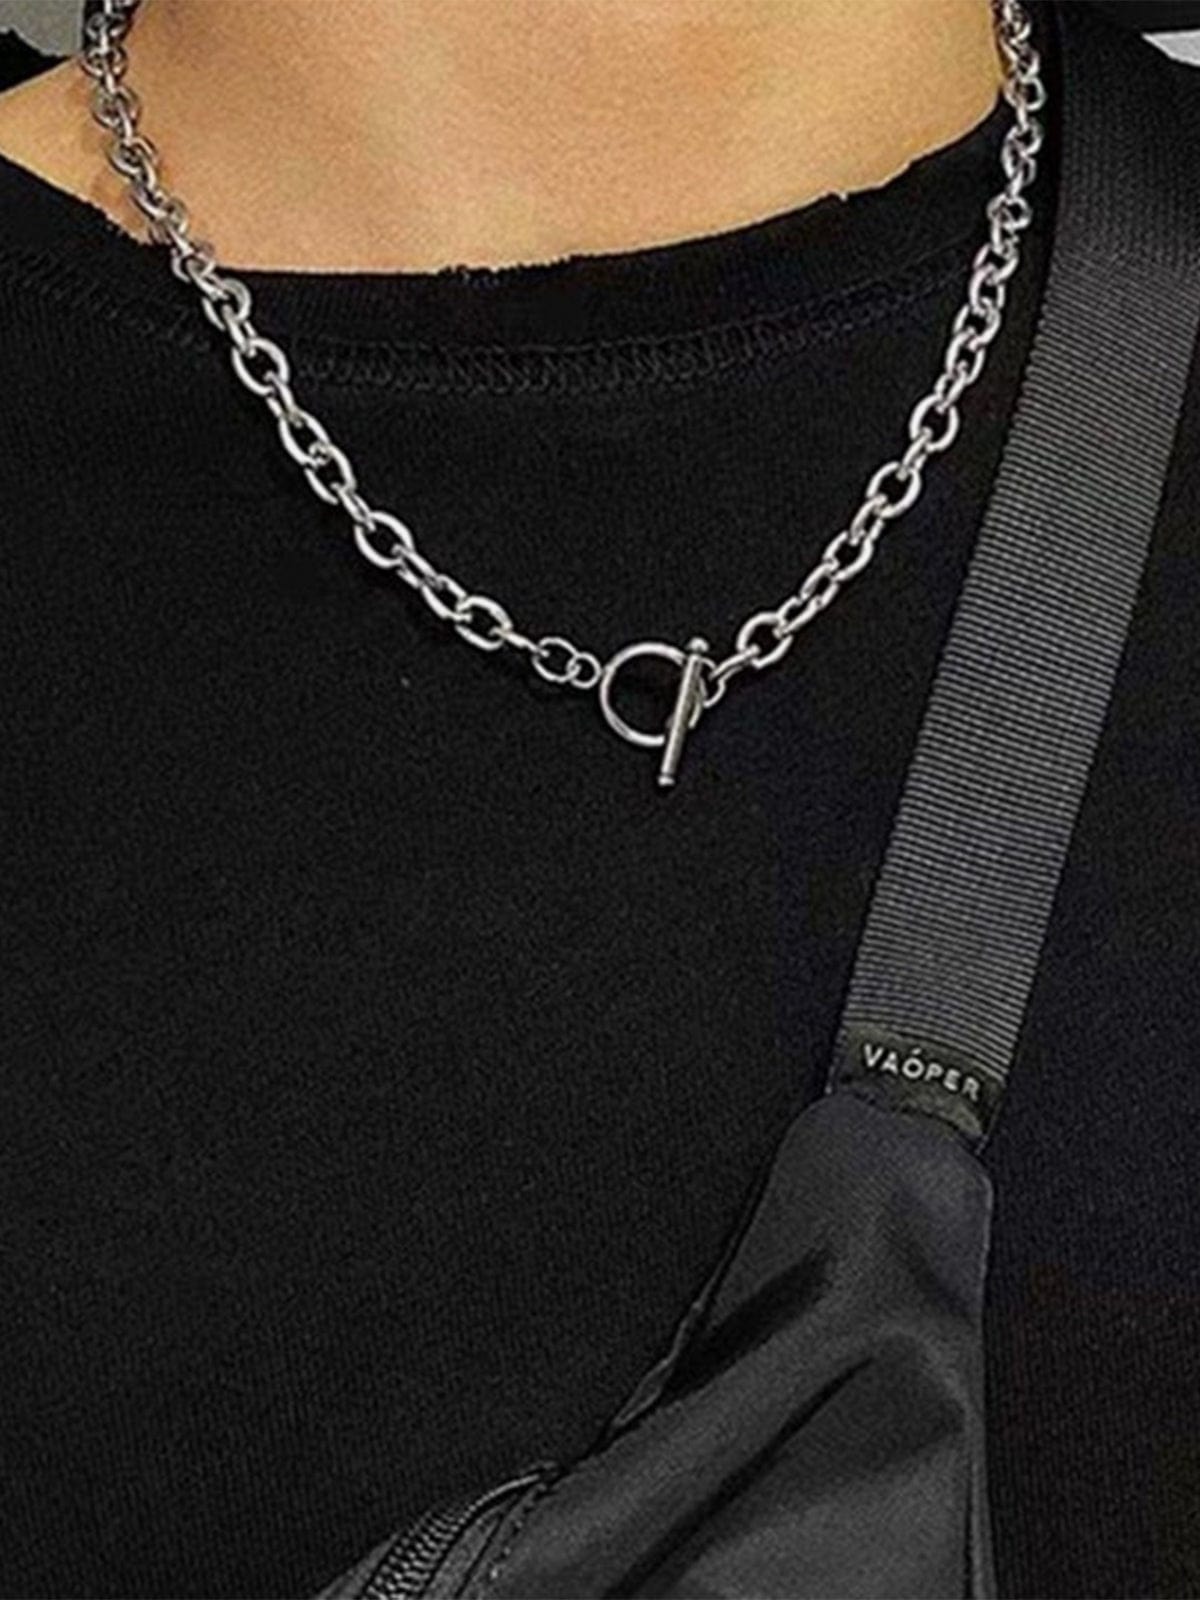 Punk Thick Chain Hollow OT Buckle Necklace Streetwear Brand Techwear Combat Tactical YUGEN THEORY